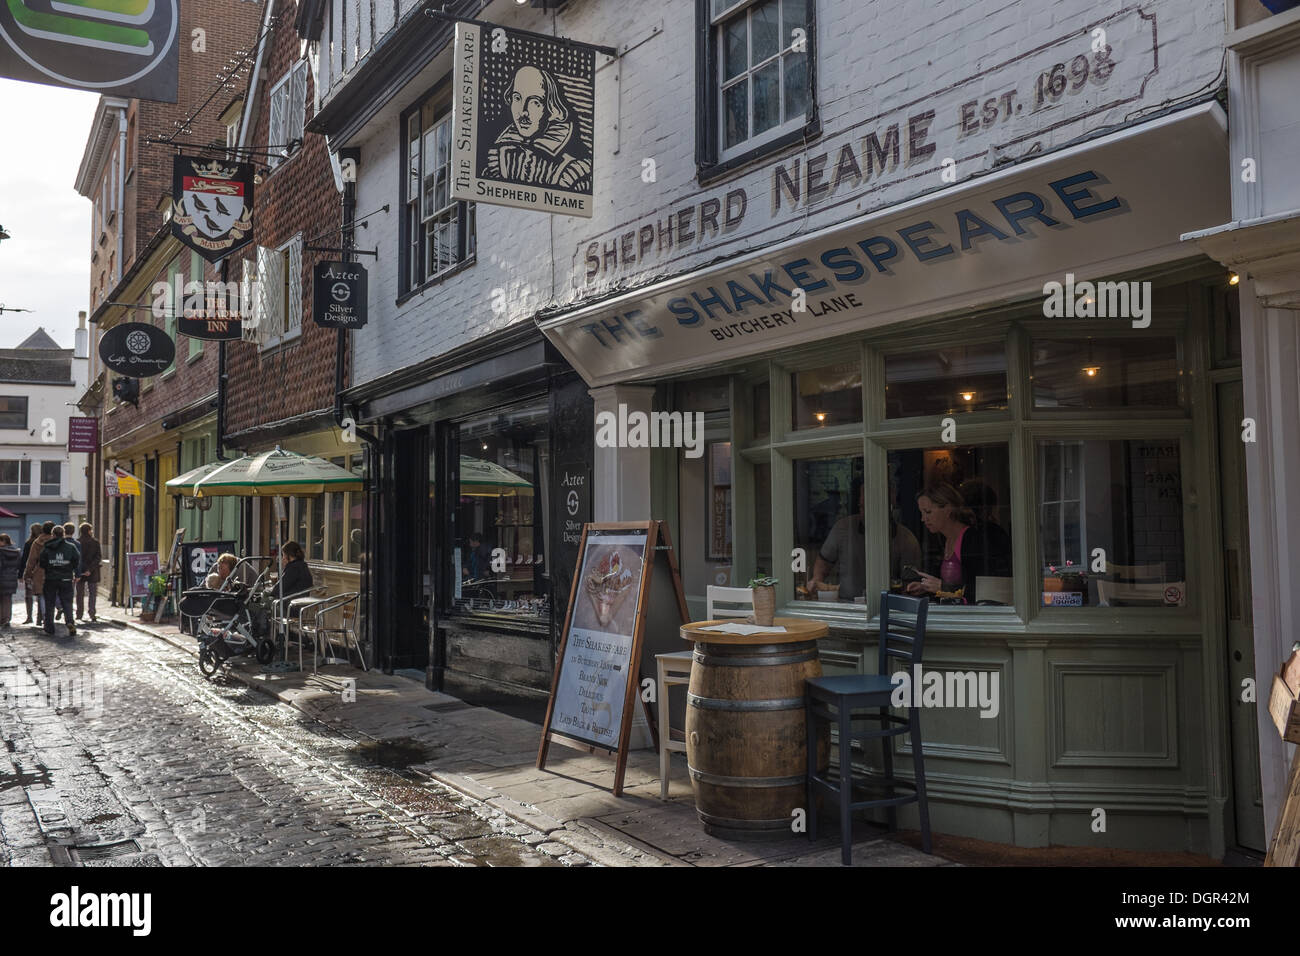 The Shakespeare Pub or Inn, Owned by Shepherd Neame, Brewery, Butchery Lane, Canterbury, UK Stock Photo